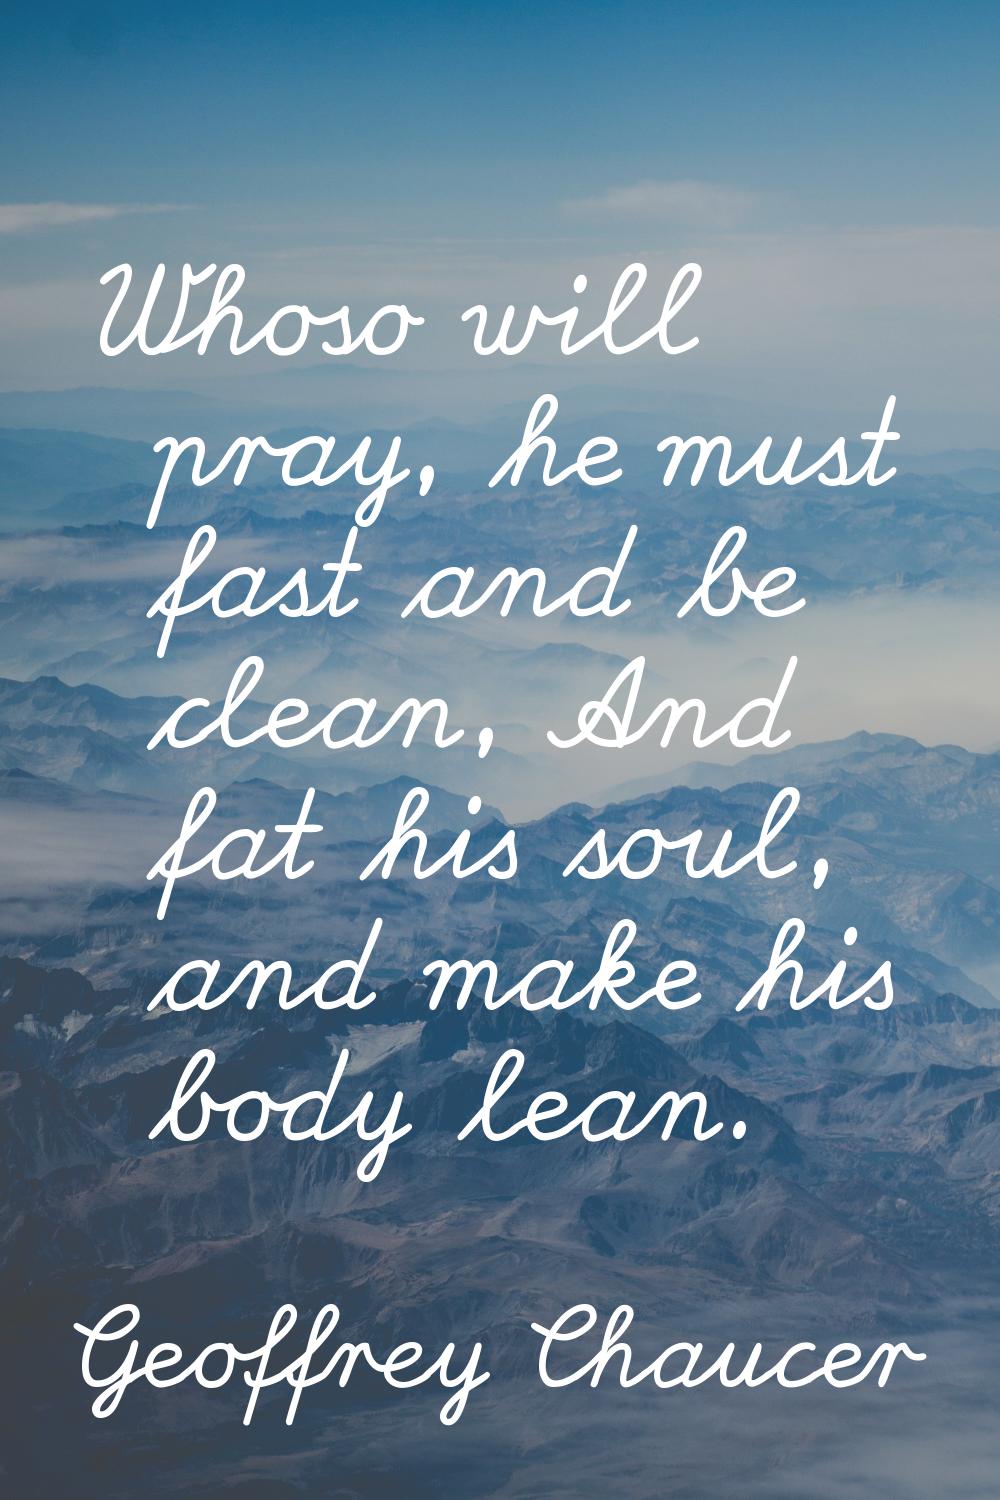 Whoso will pray, he must fast and be clean, And fat his soul, and make his body lean.